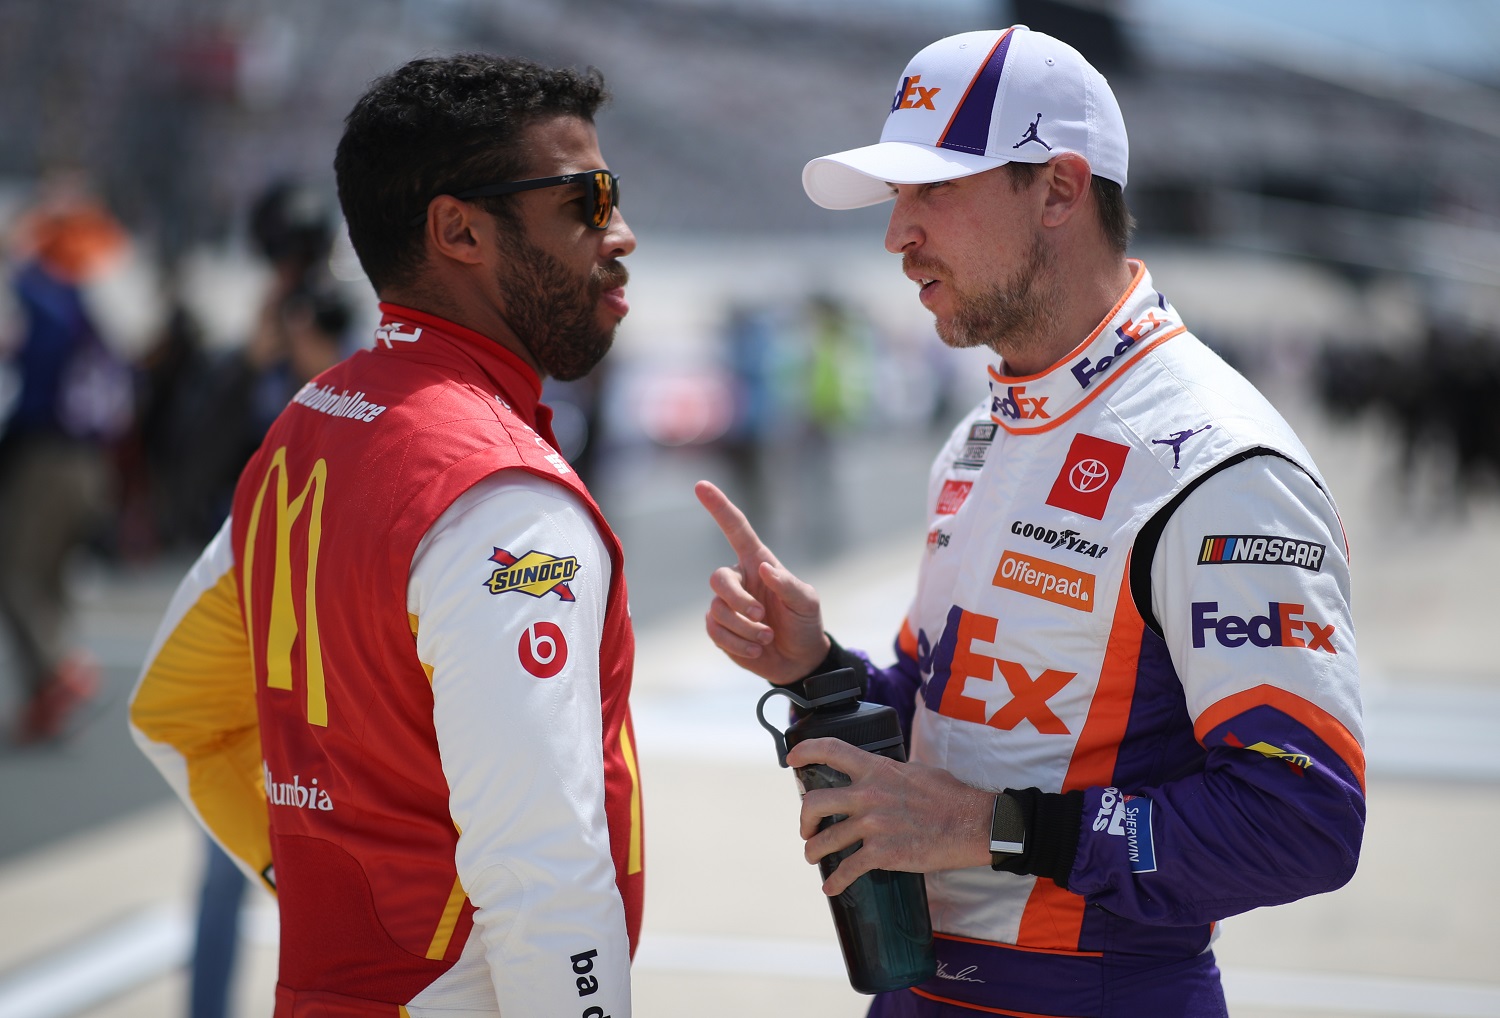 Bubba Wallace, driver of the No. 23 Toyota, and Denny Hamlin, driver of the No. 11 Toyota, talk on the grid during the NASCAR Cup Series Drydene 400 at Dover International Speedway on May 16, 2021 in Dover, Delaware.